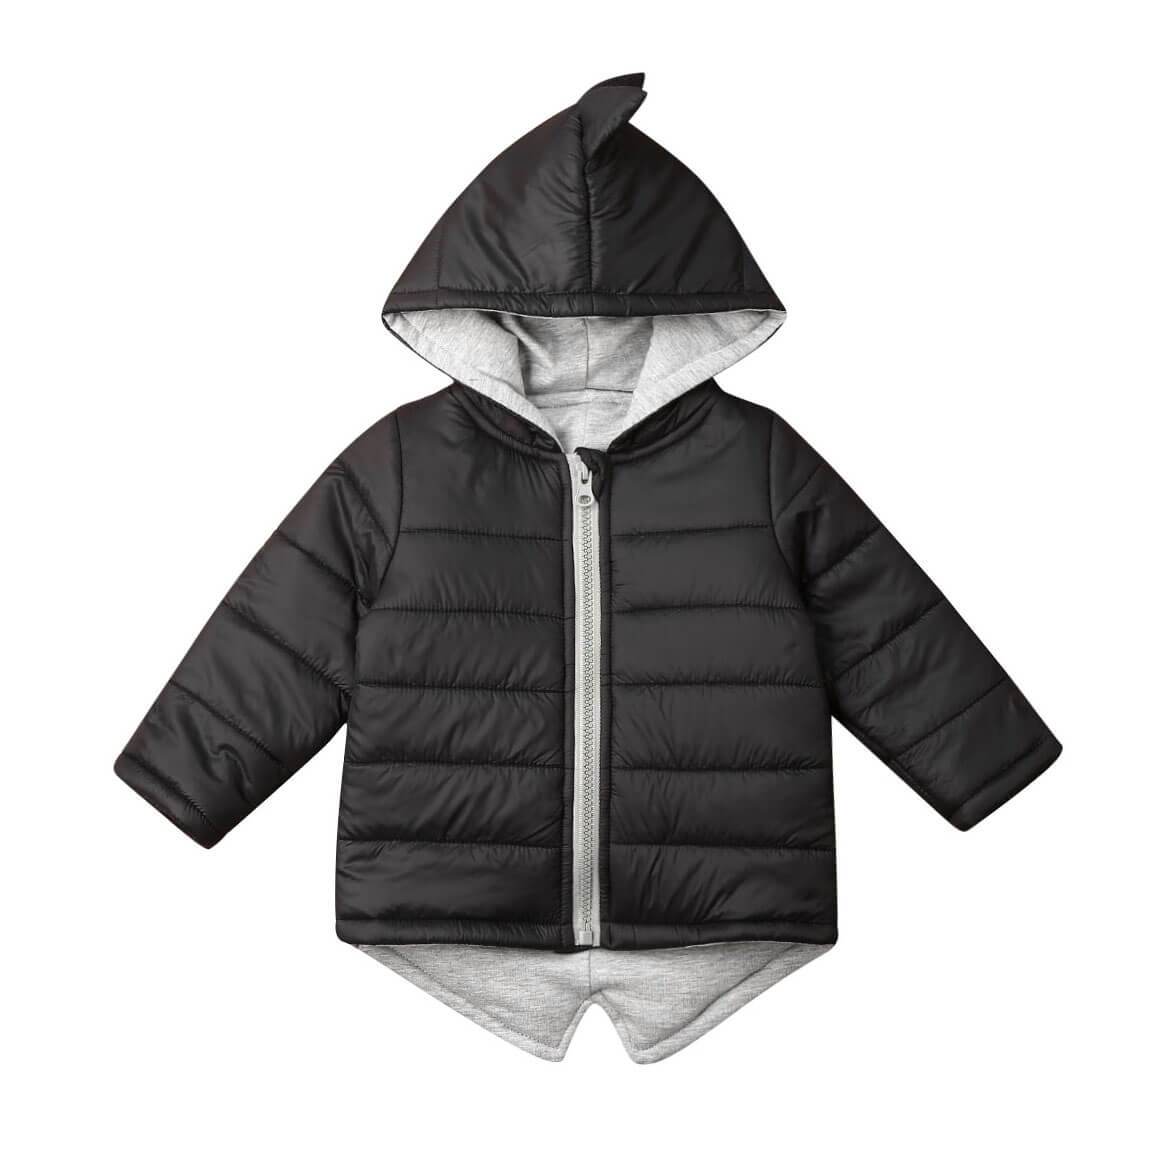 Dino Zipper Jacket - The Trendy Toddlers